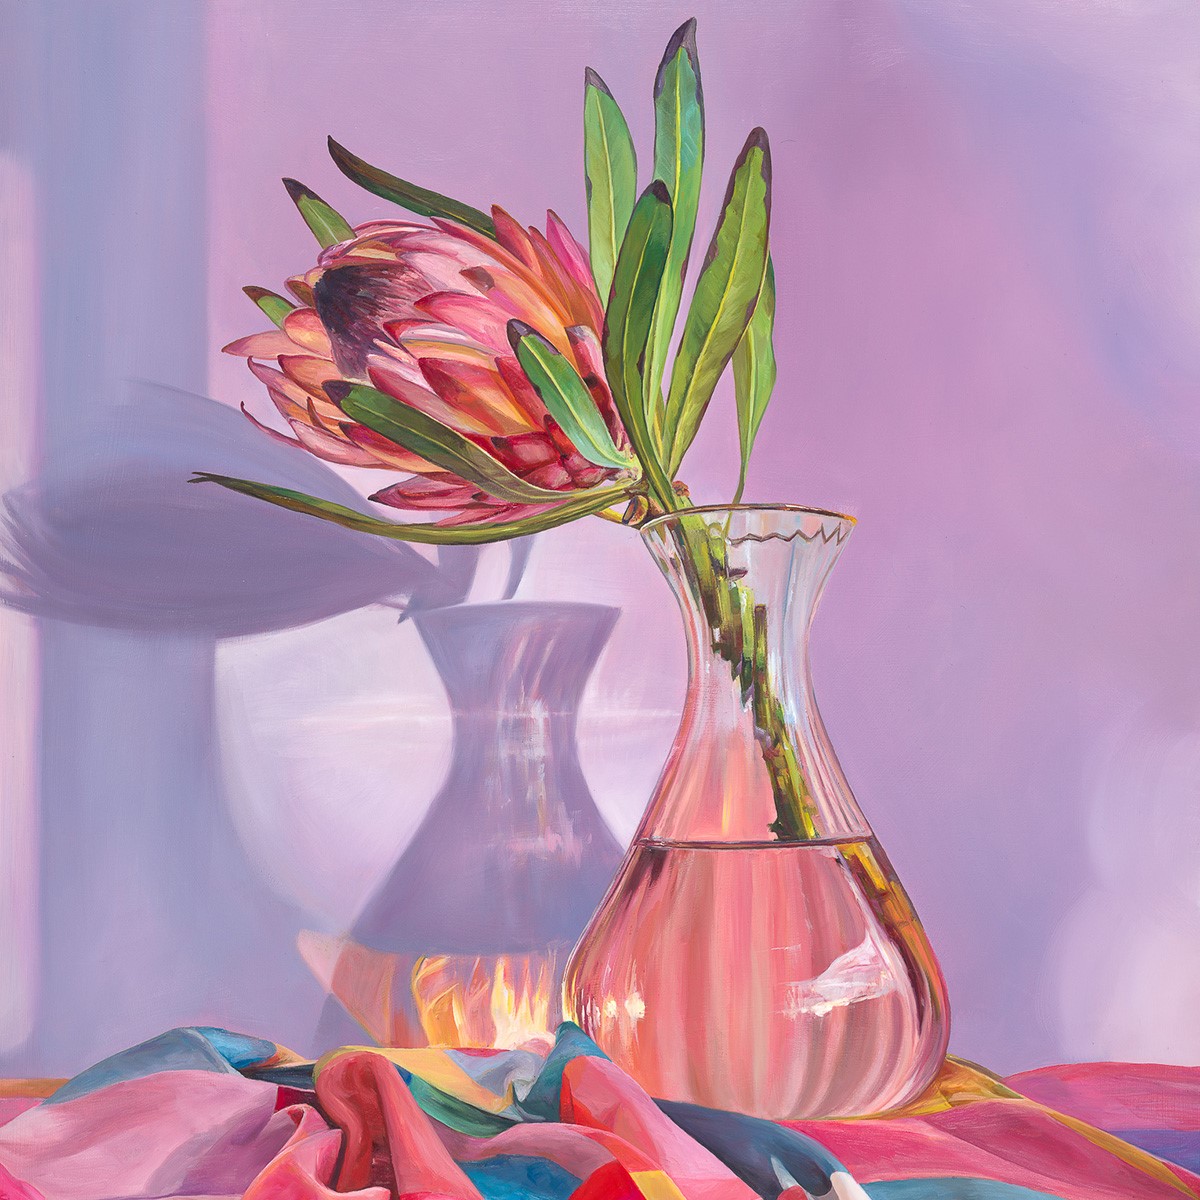 Attachment: Wonderful Hyper Realistic Still Life Paintings By ...